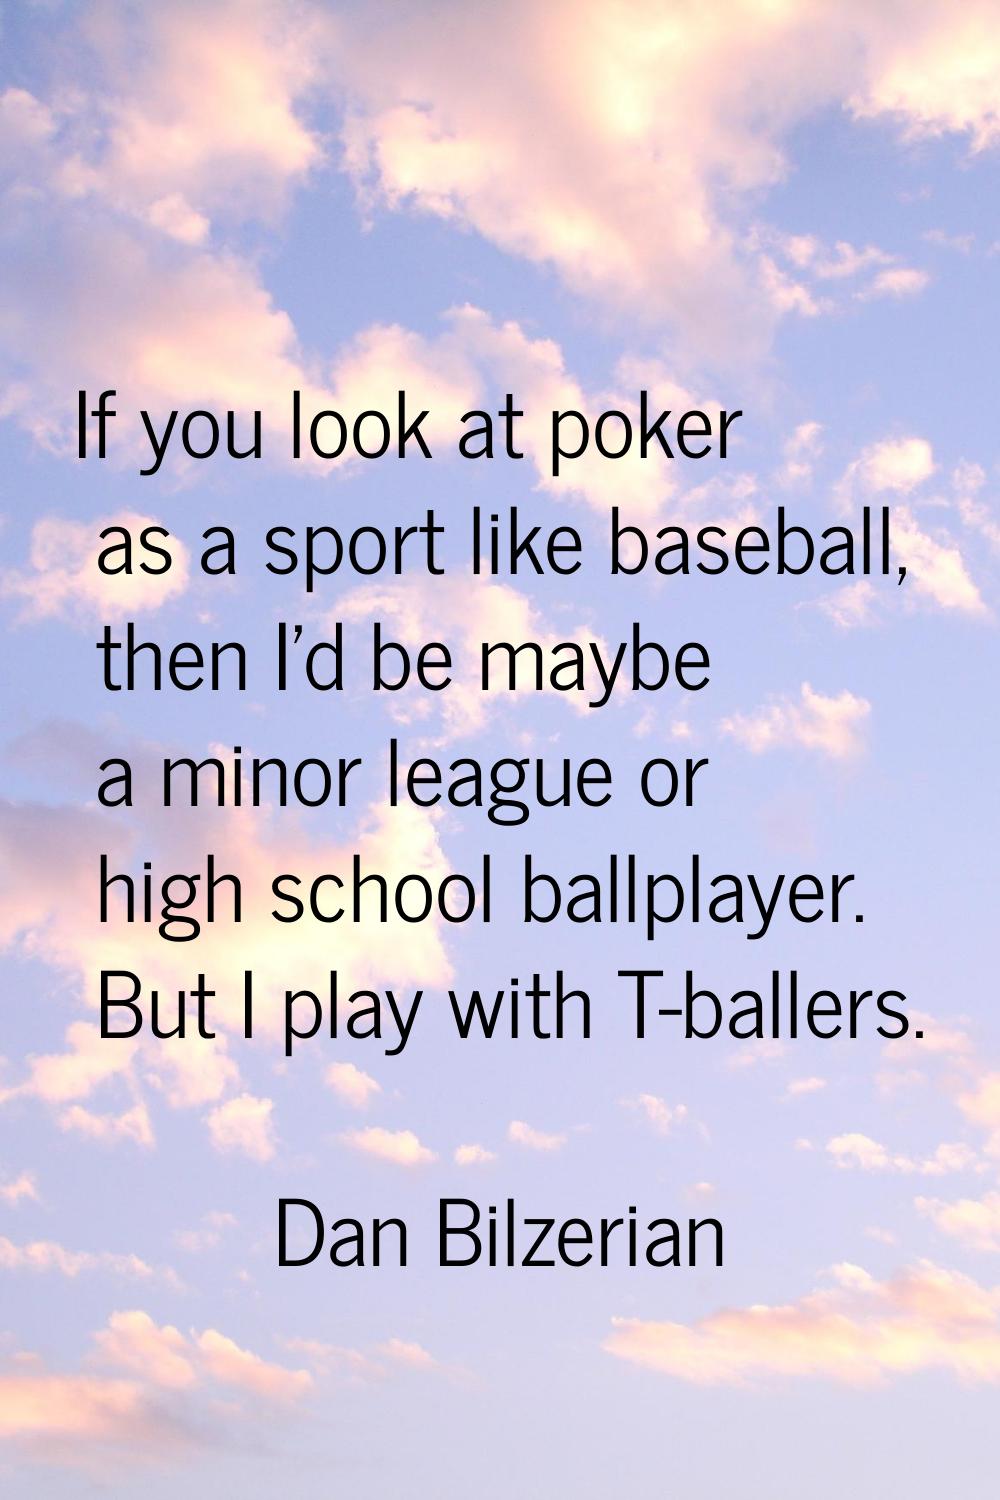 If you look at poker as a sport like baseball, then I'd be maybe a minor league or high school ball